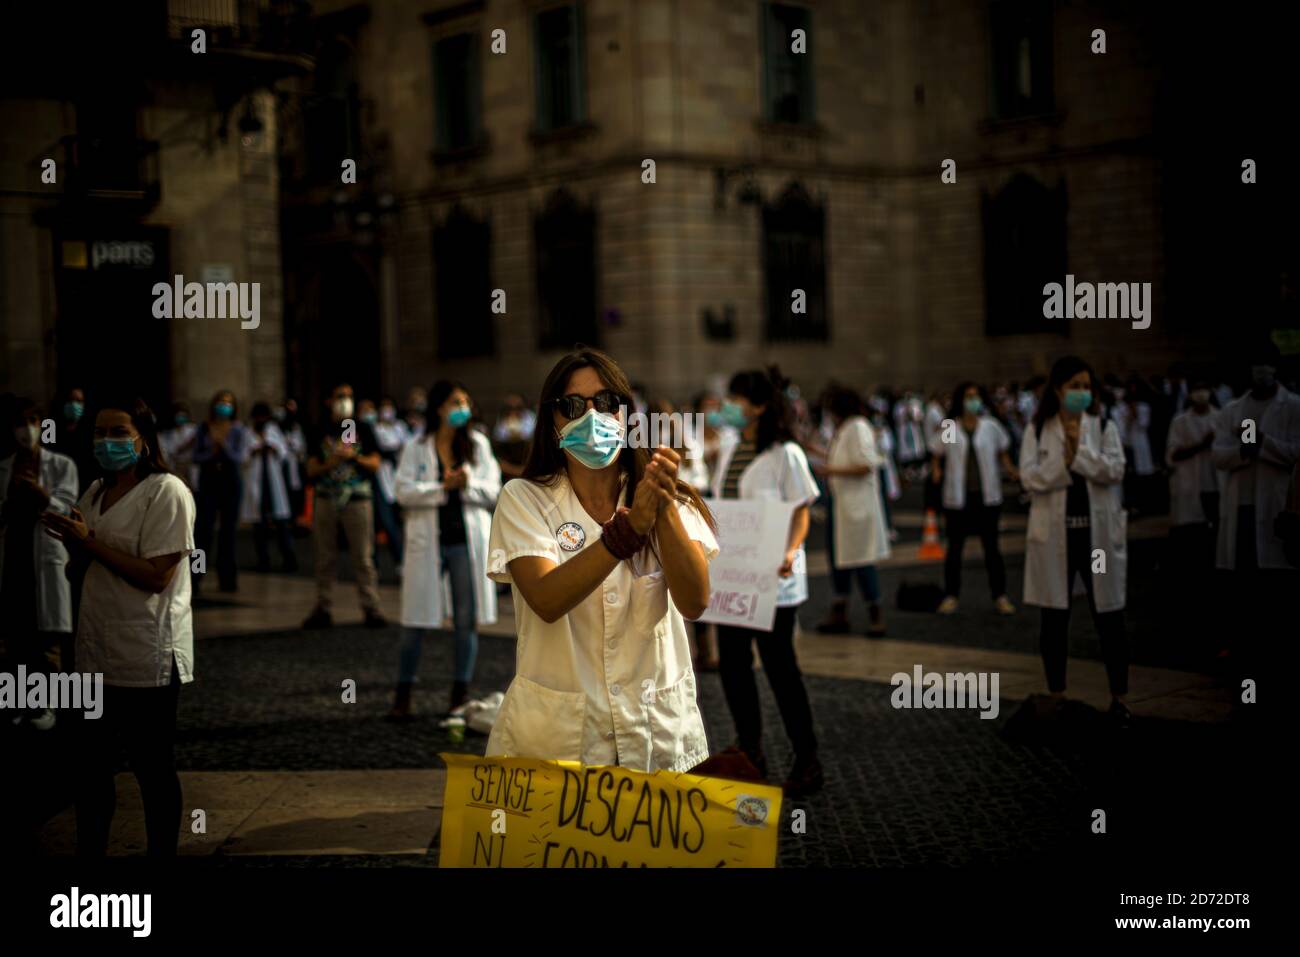 Barcelona, Spain. 20th Oct, 2020. A young resident doctor shouts slogans during a protest over precarious conditions during their postgraduate training specializing in the health care system due to low wages, high number of working hours and lack of monitoring. Credit: Matthias Oesterle/Alamy Live News Stock Photo